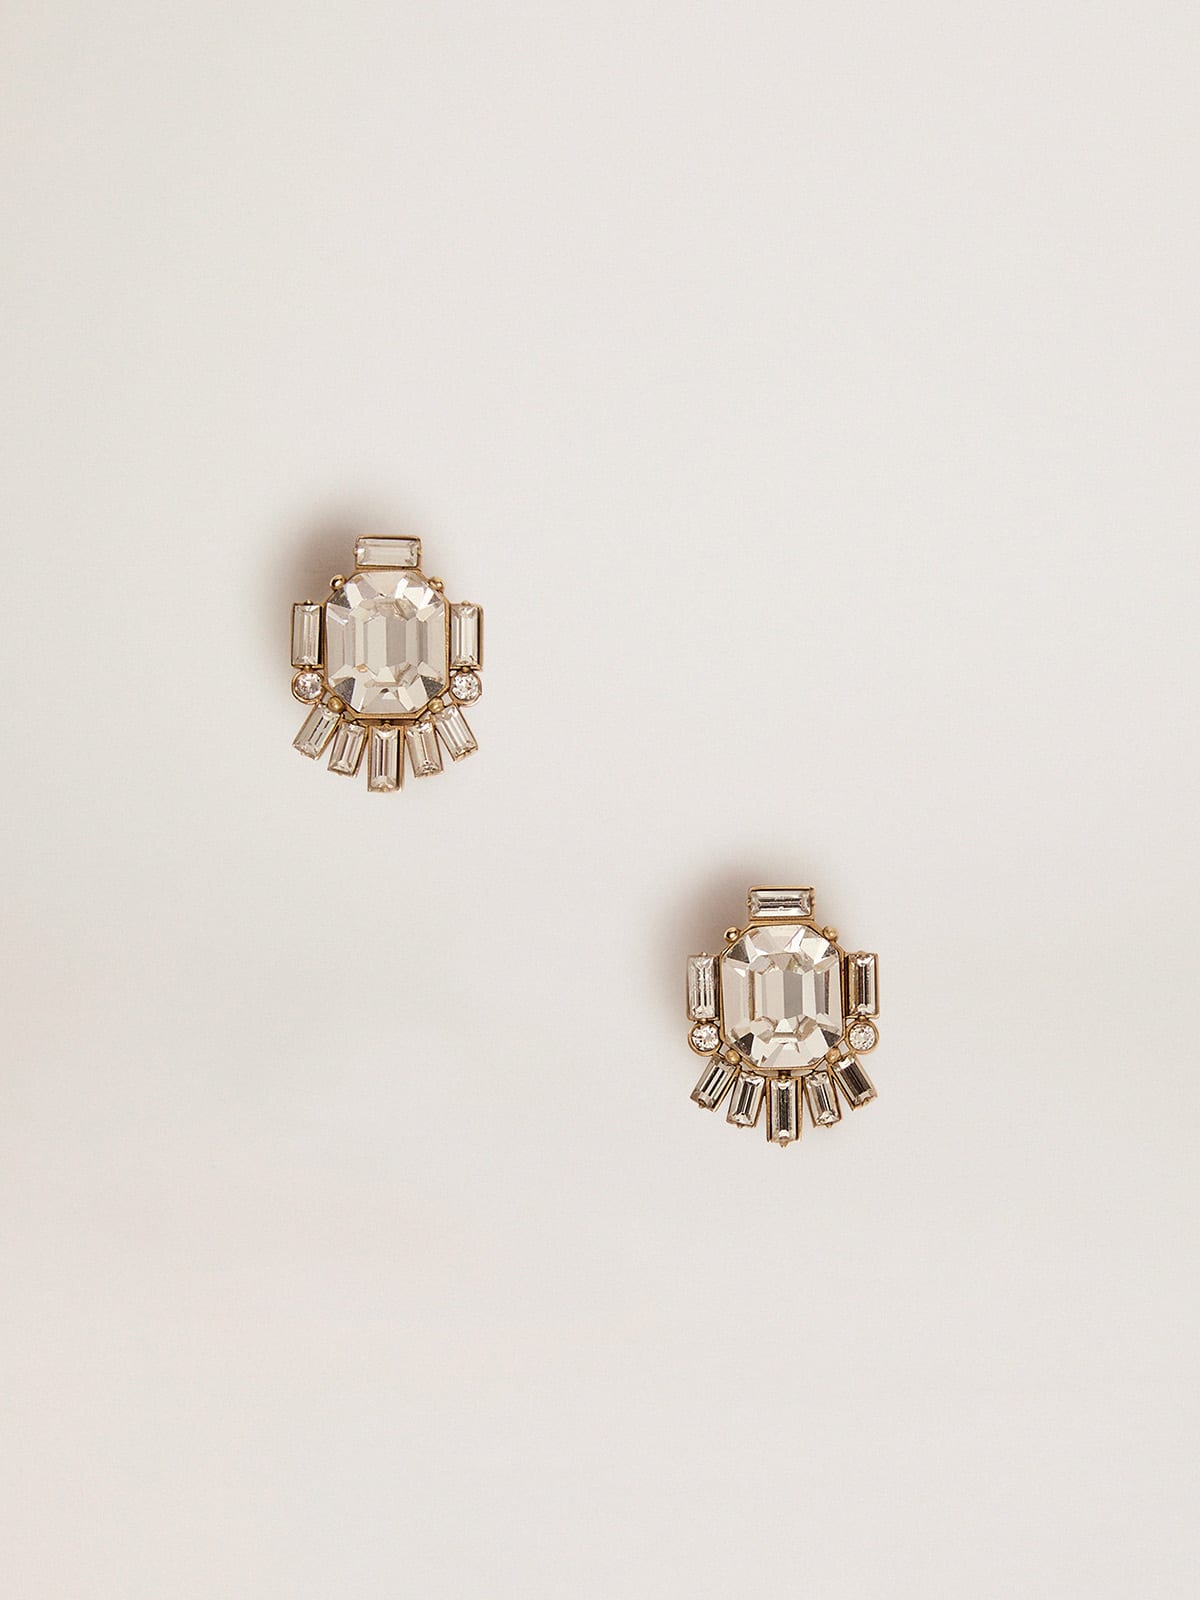 Golden Goose - Stud earrings in old gold color with decorative crystals in 